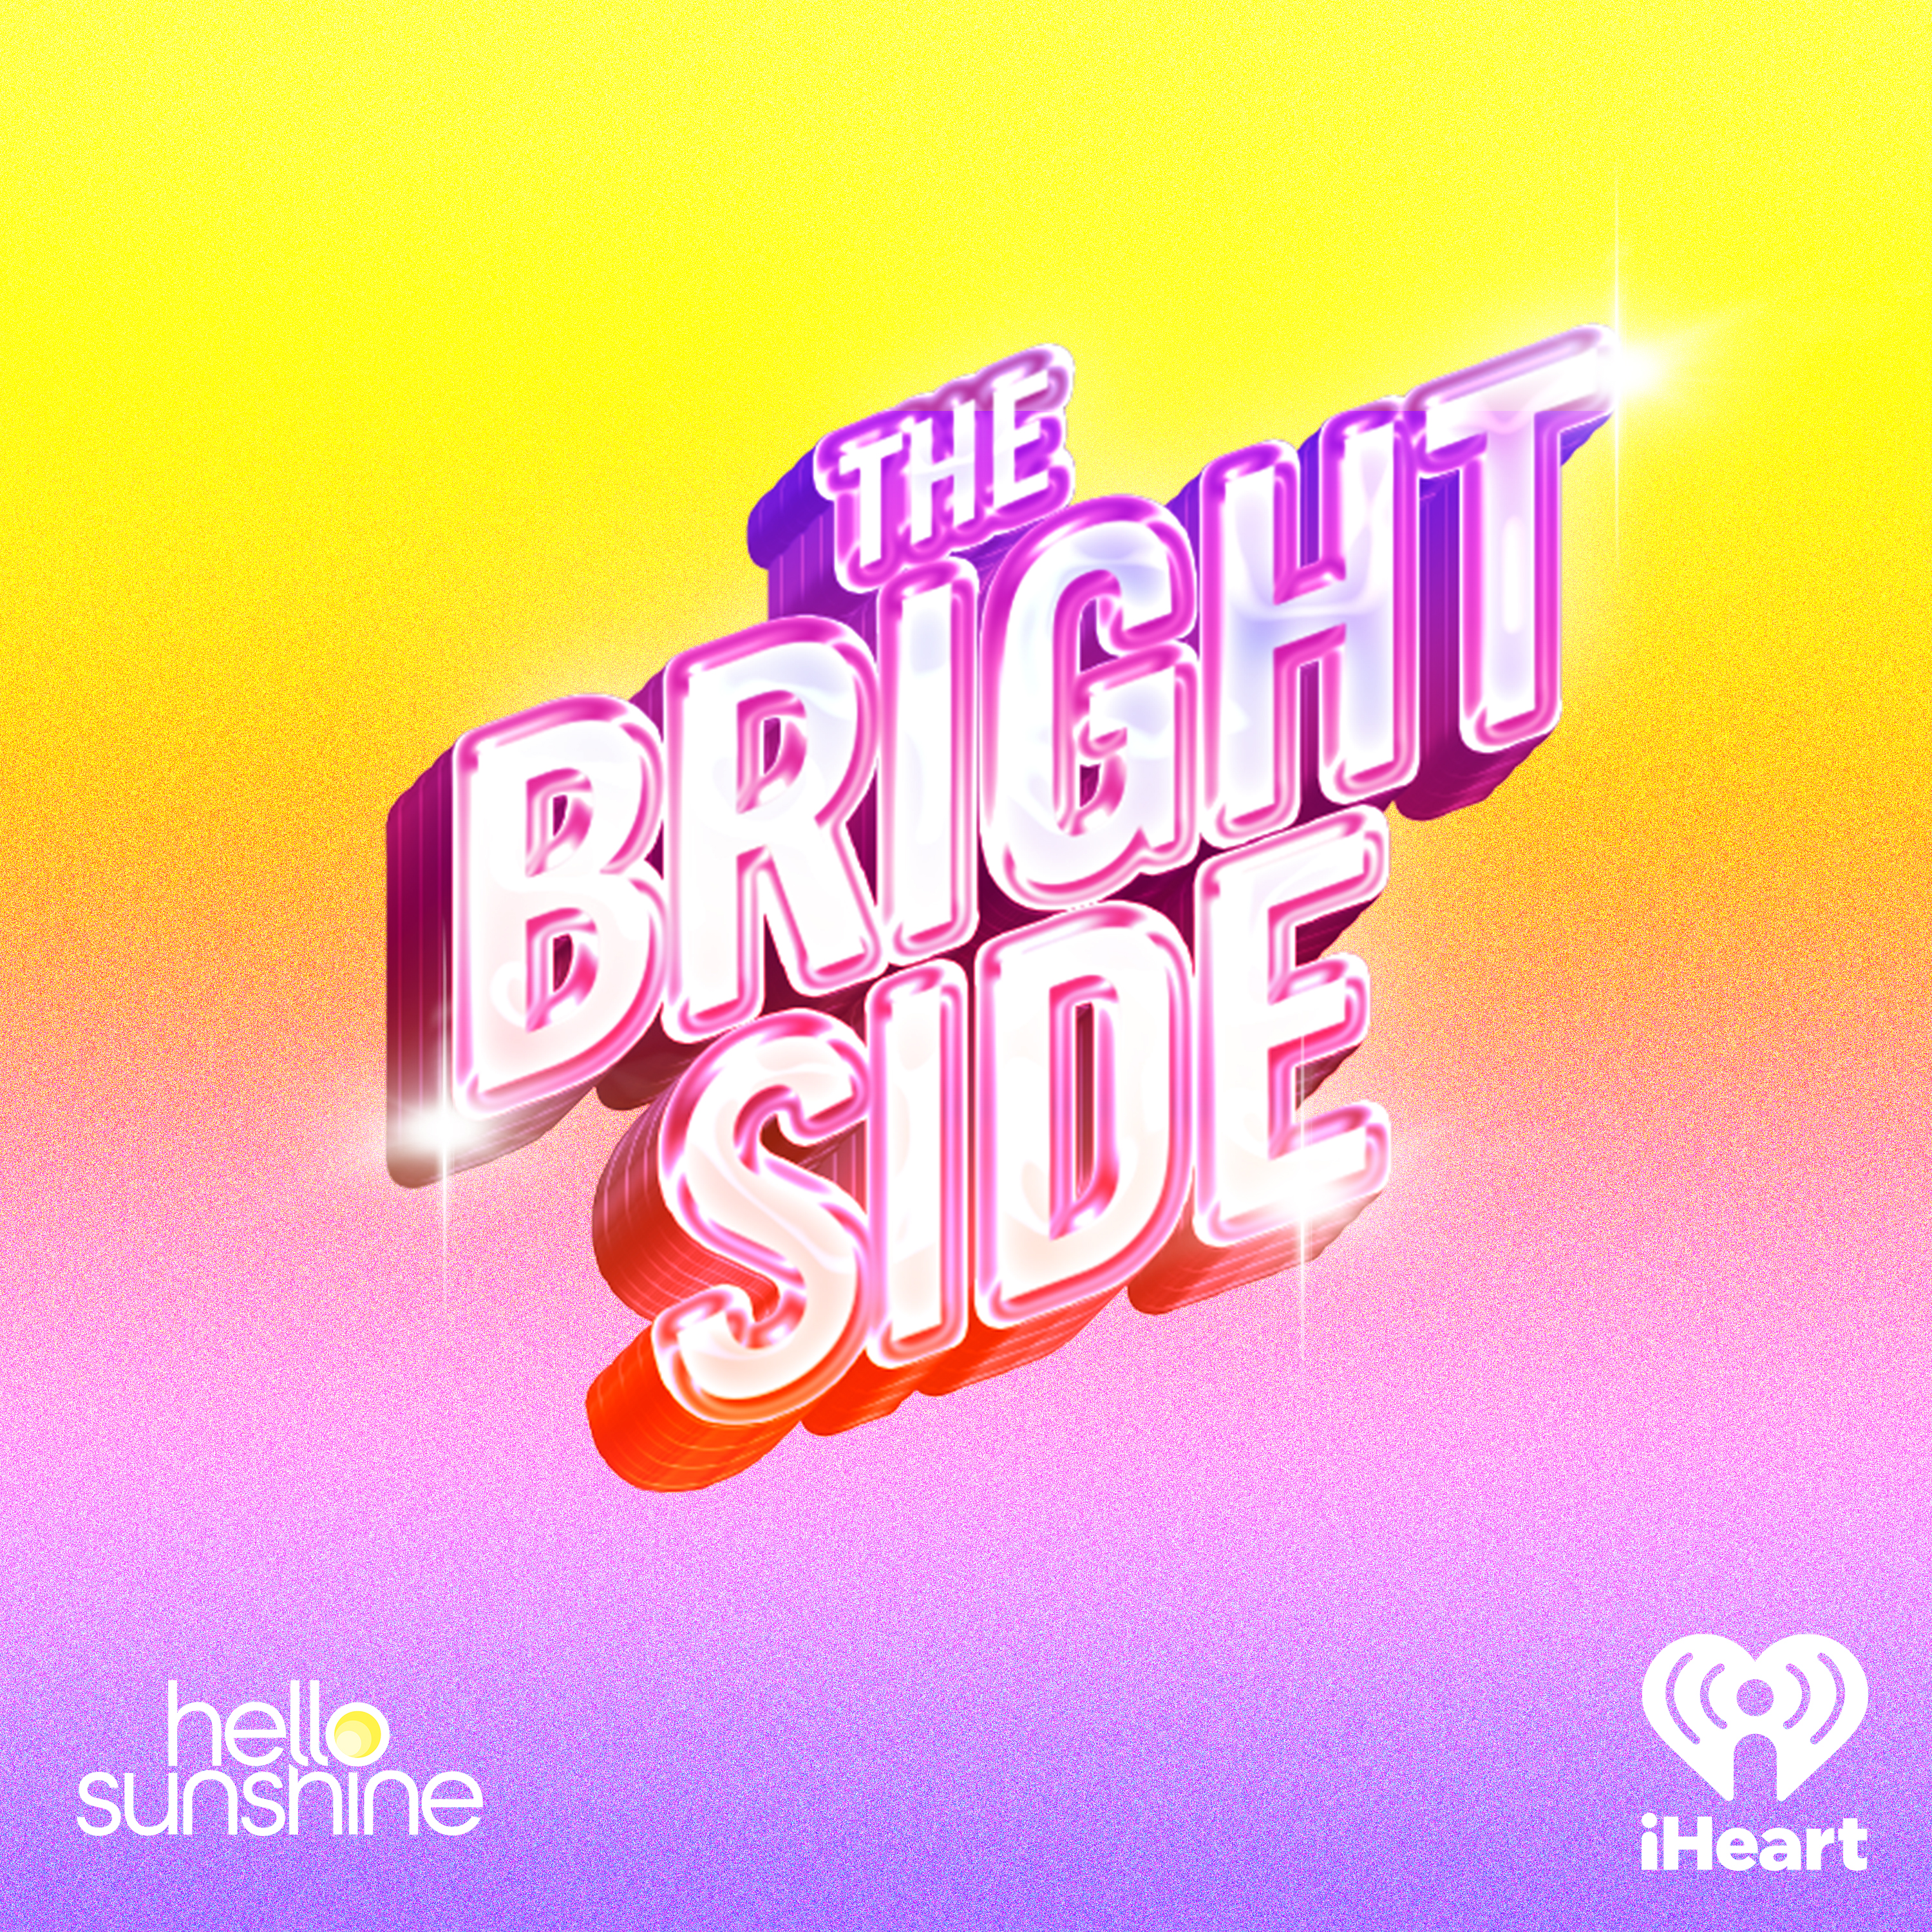 Introducing The Bright Side from Hello Sunshine, coming March 25th